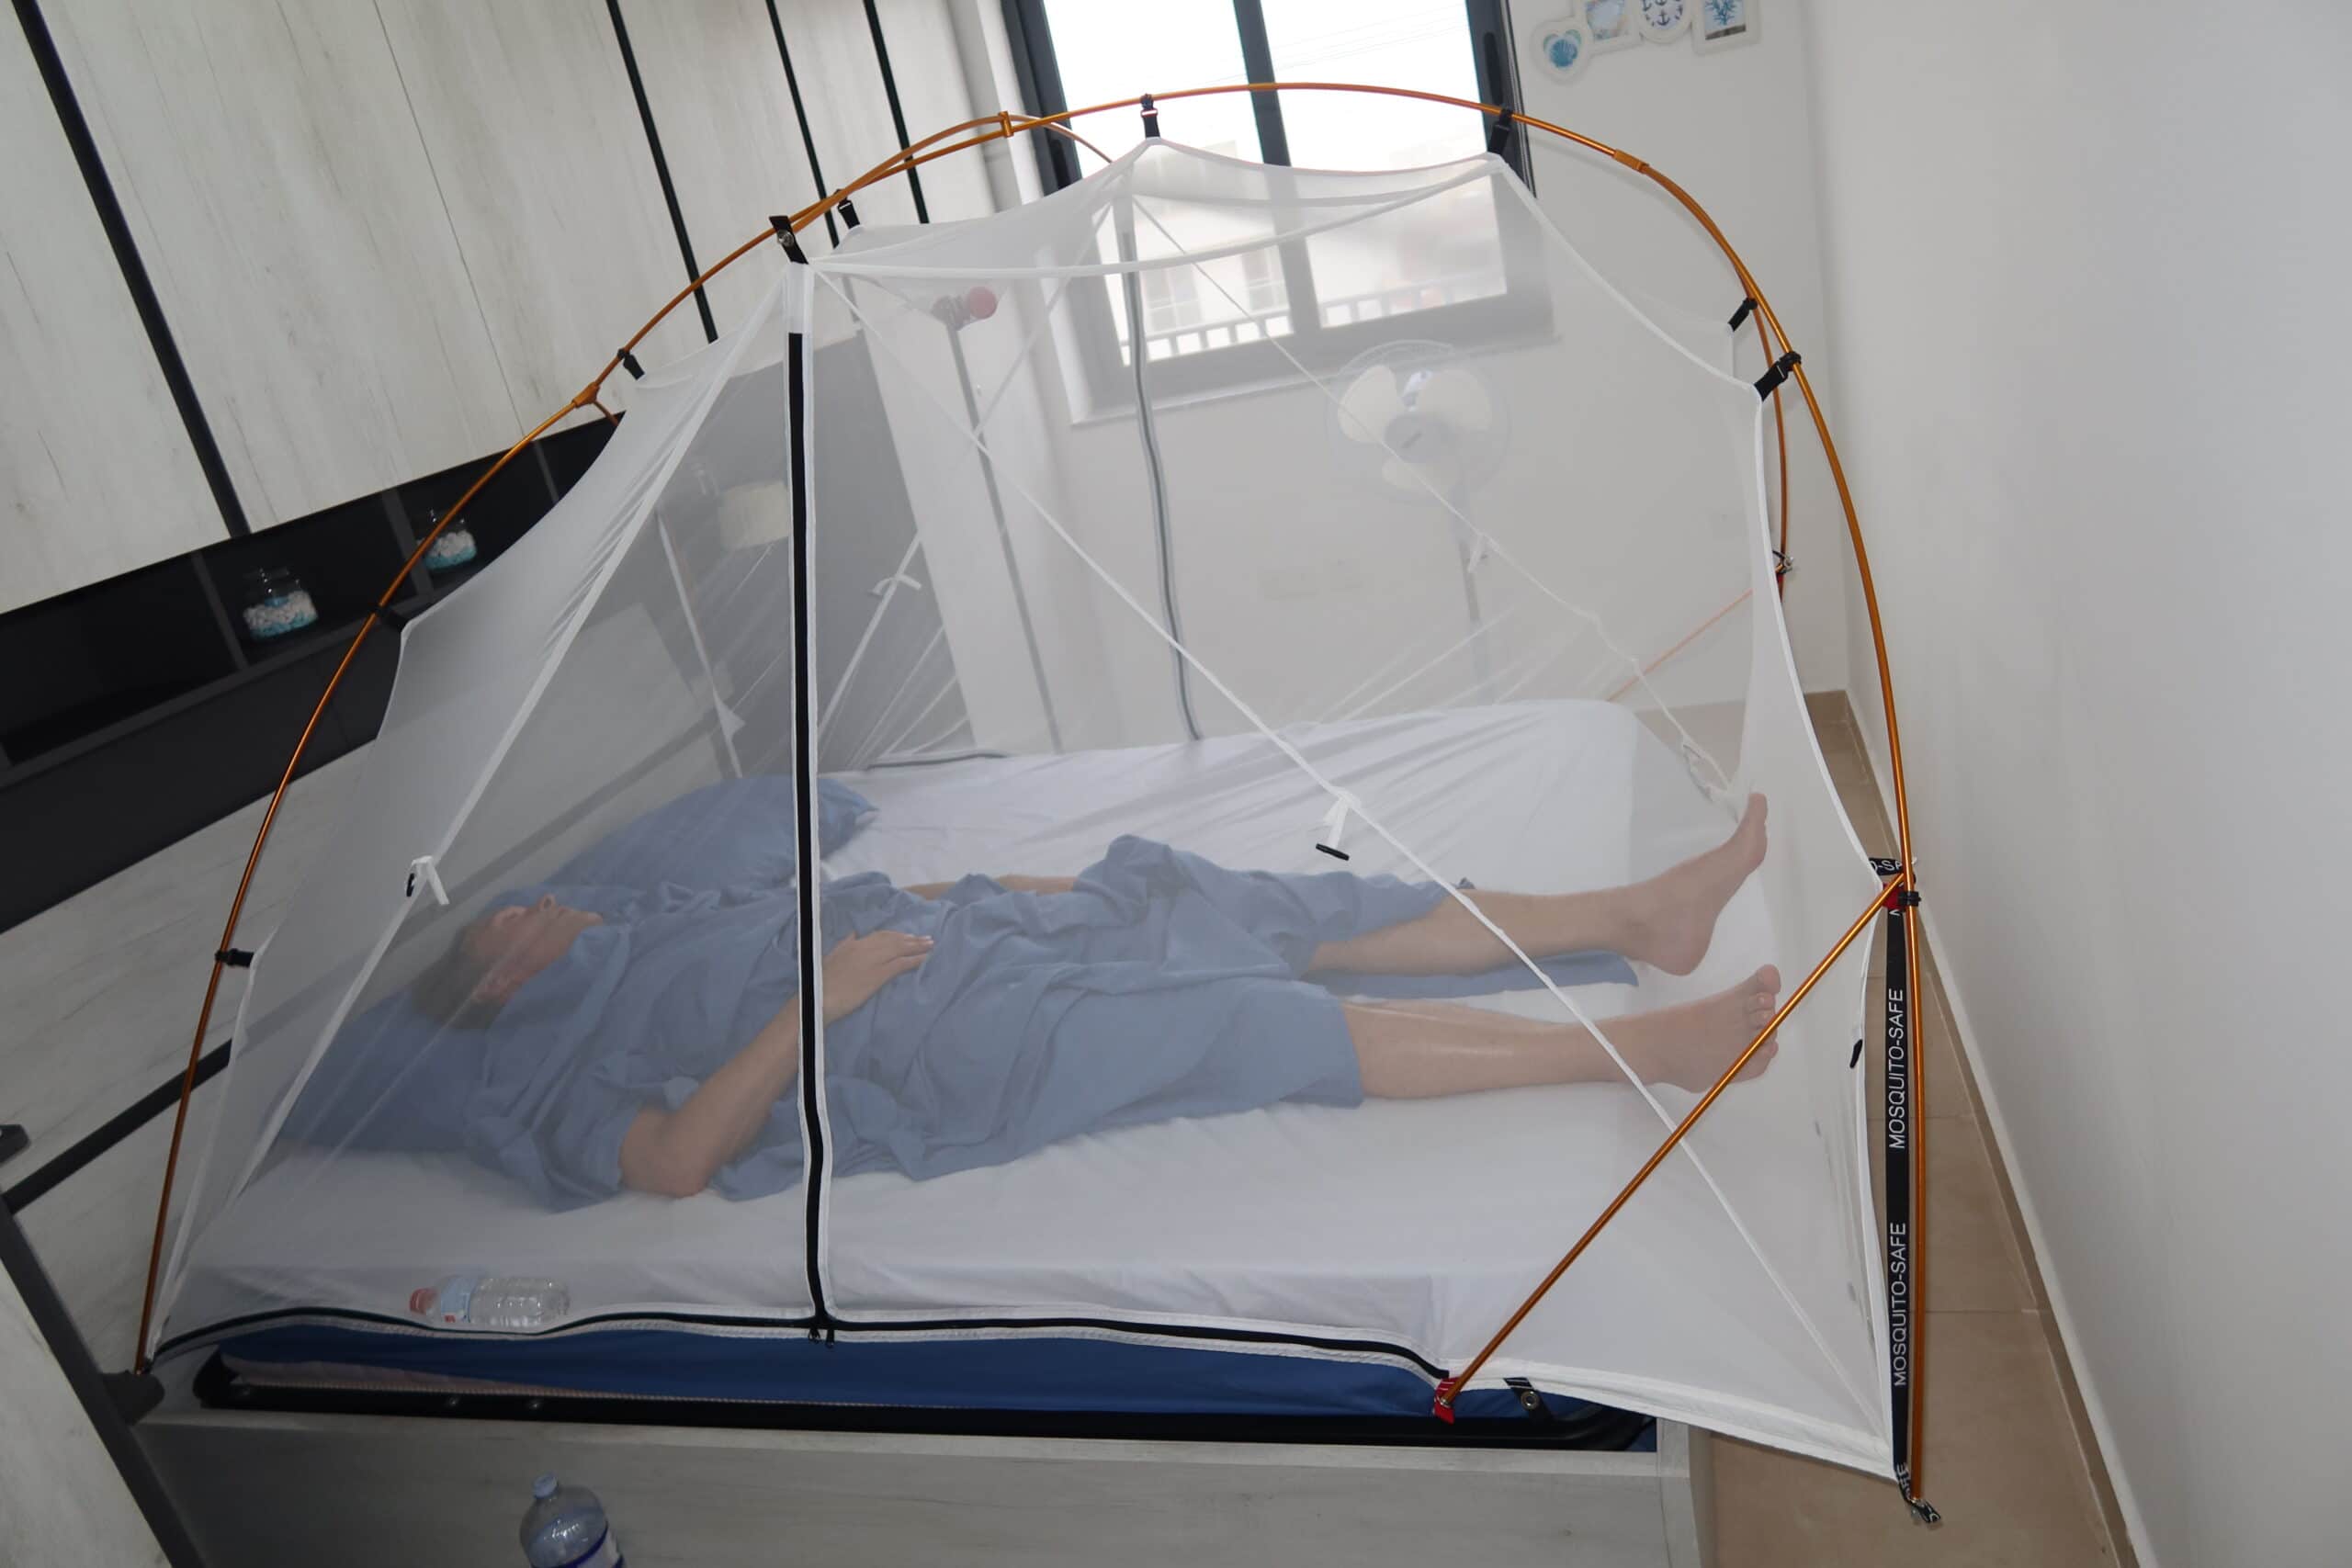 Set up your extra-long mosquito-protection tent on the bed. It is safe to lie down directly on the bottom material.